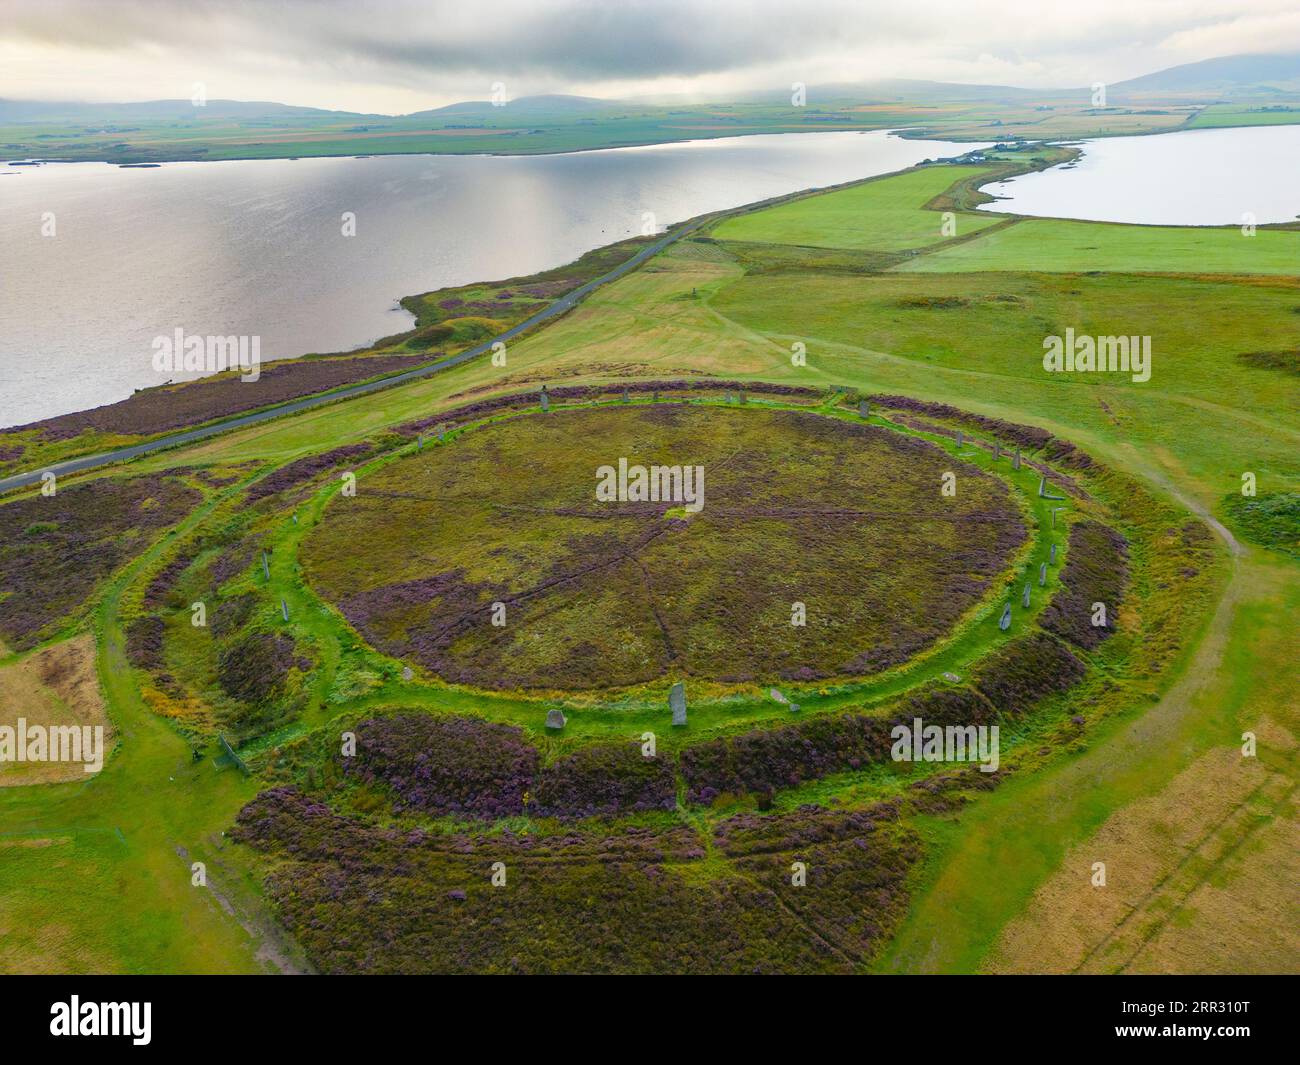 Aerial view of Ring of Brodgar neolithic henge and stone circle at West mainland, Orkney Islands, Scotland, UK. Stock Photo